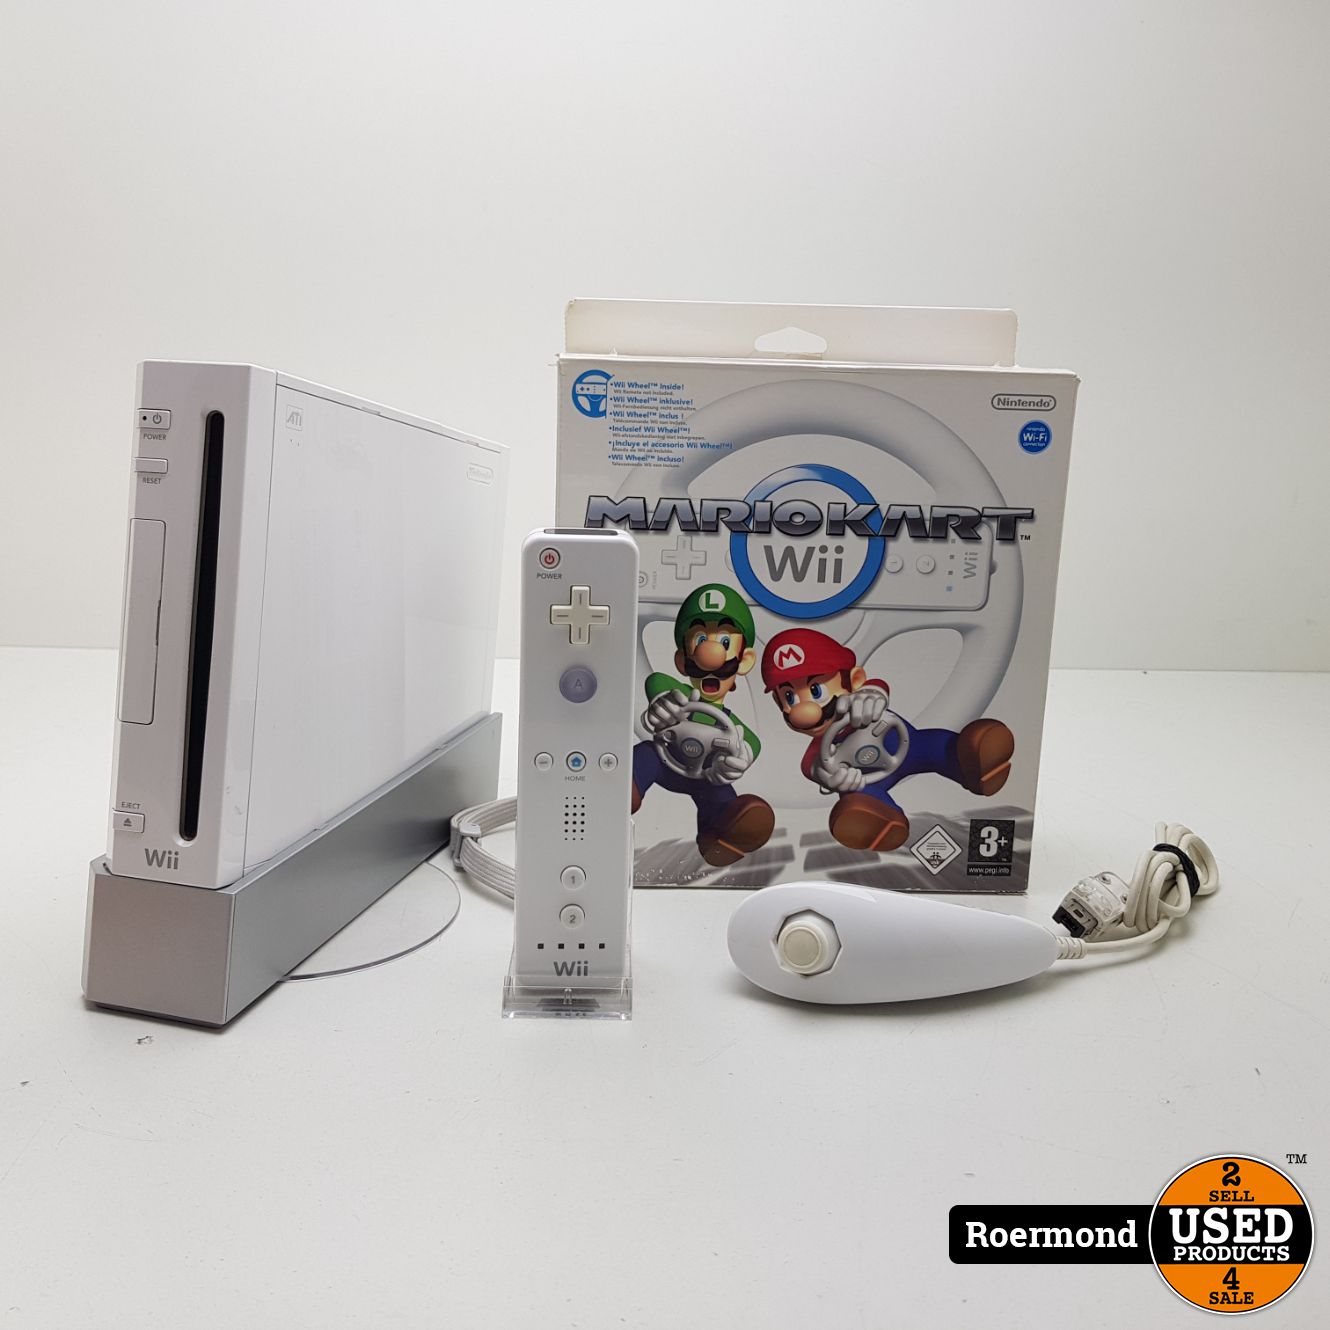 Gameconsole + Wii - Used Products Roermond